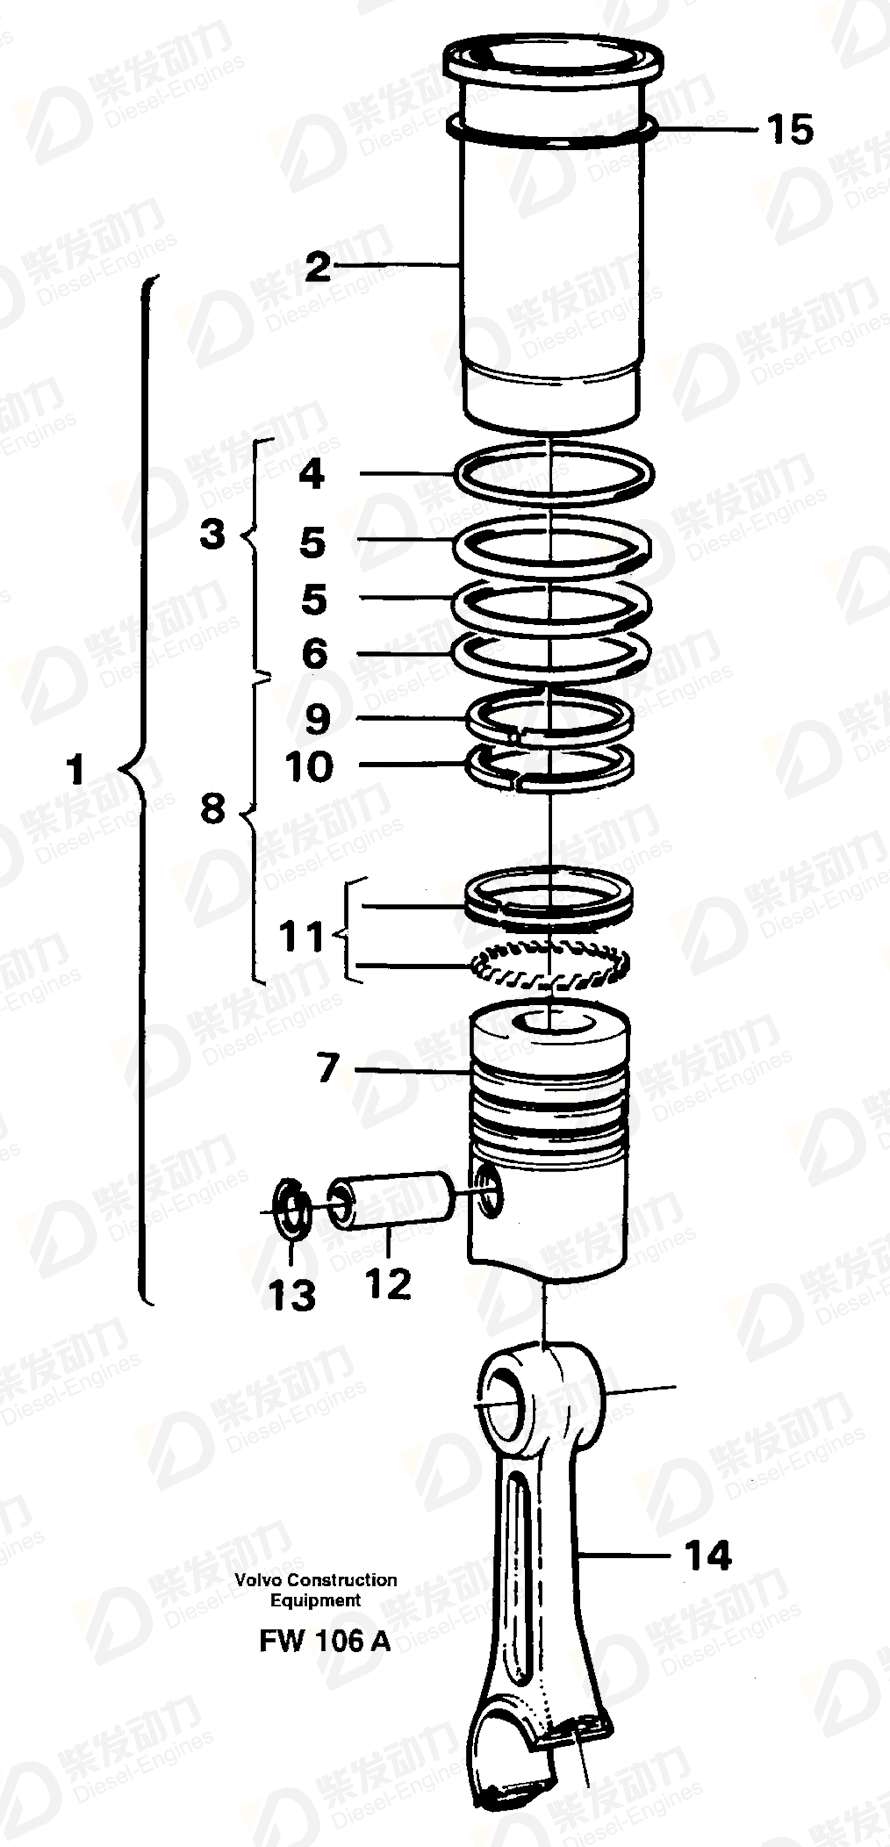 VOLVO Compression ring 477492 Drawing